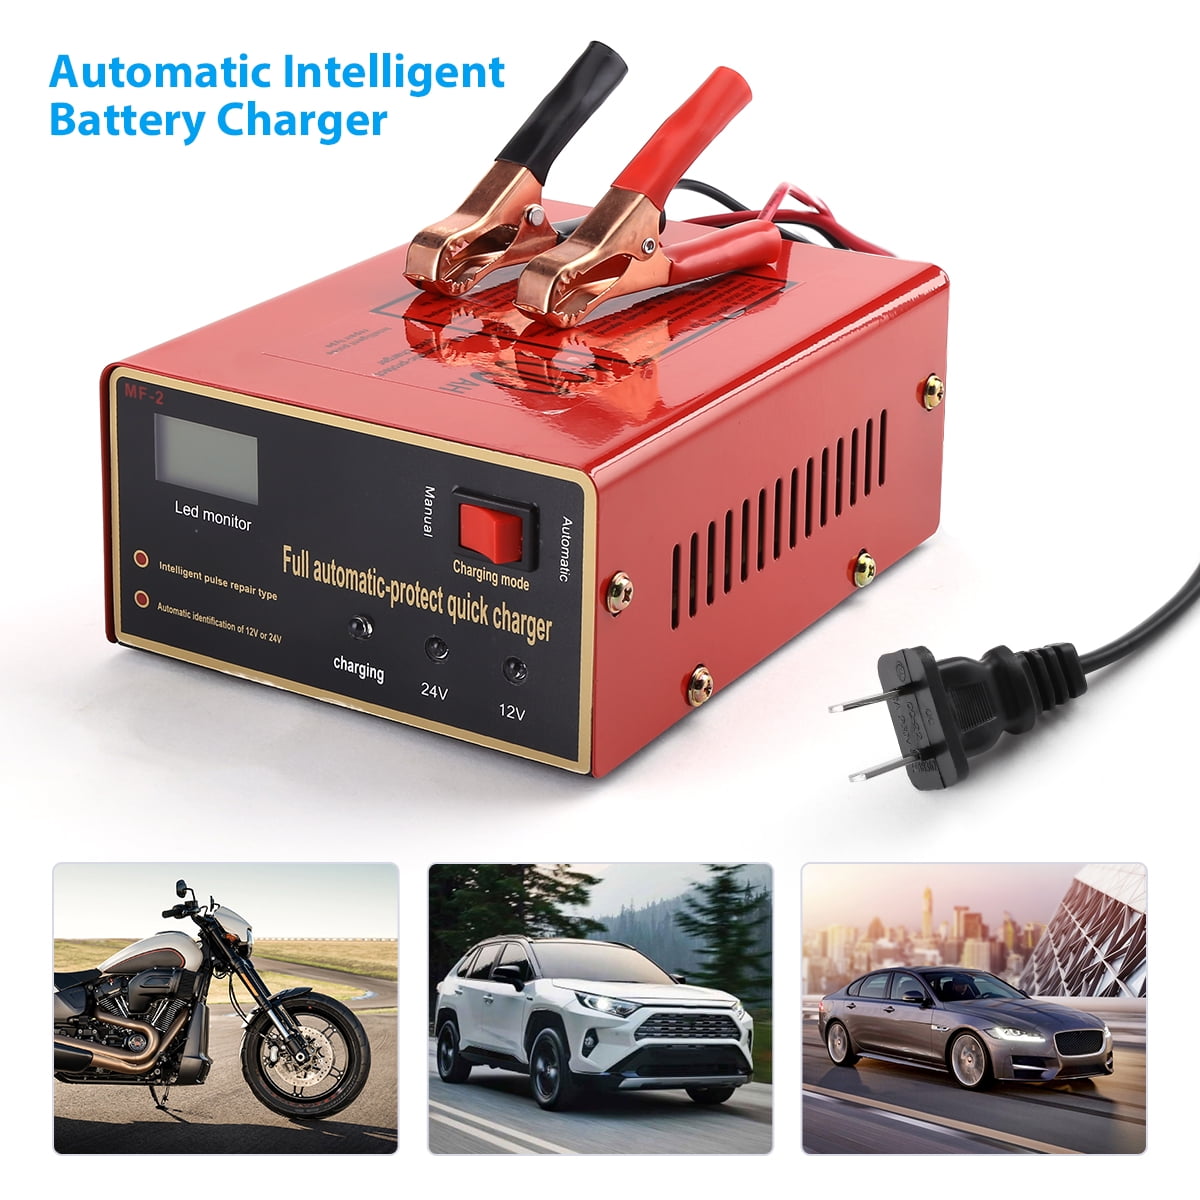 12V/24V Full Automatic Maintenance-free Car Battery Charger Smart Fast  Power Charging for Scooter, Motorcycle, Car, Tractor Boat 